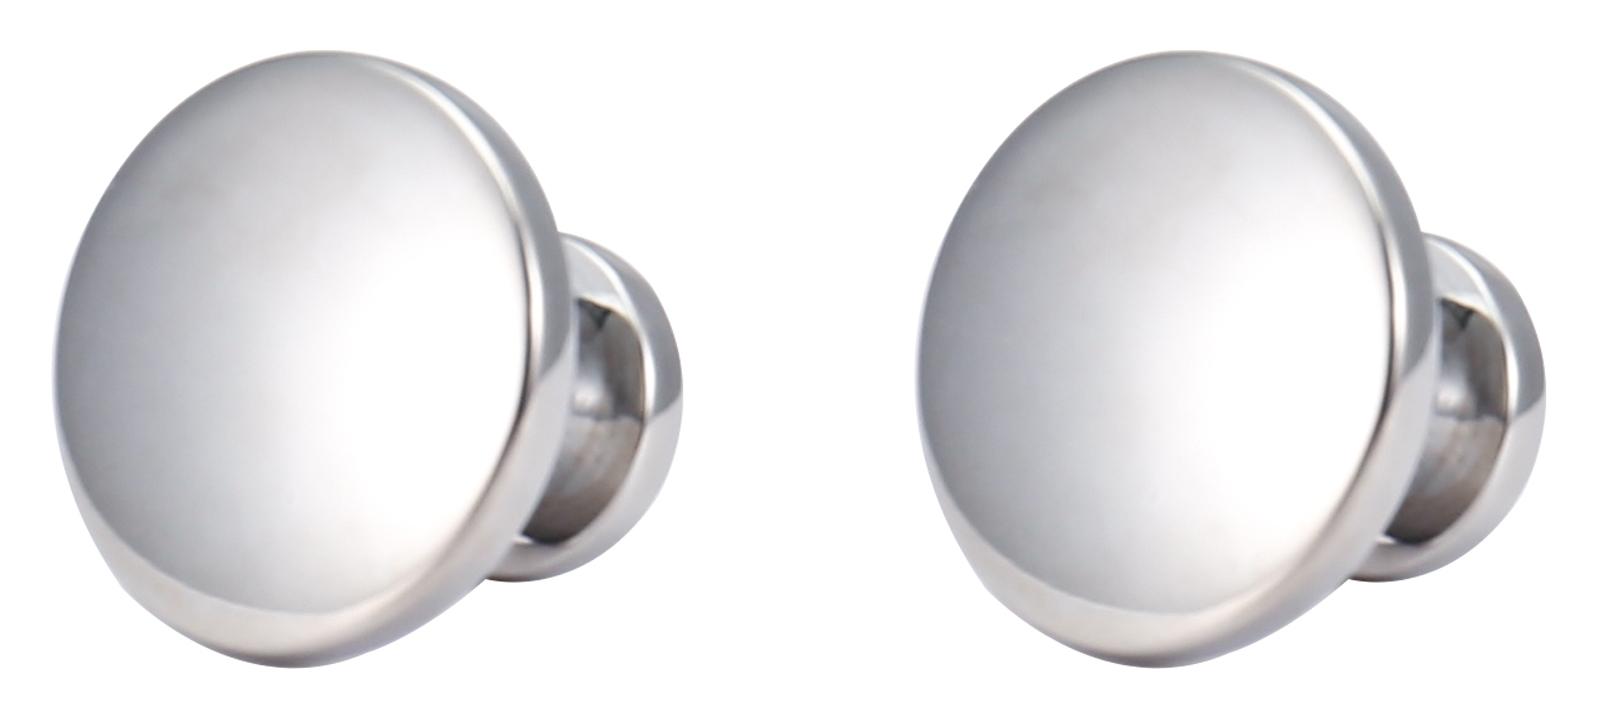 Victorian Door Knob Polished Chrome 30mm - Pack of 6